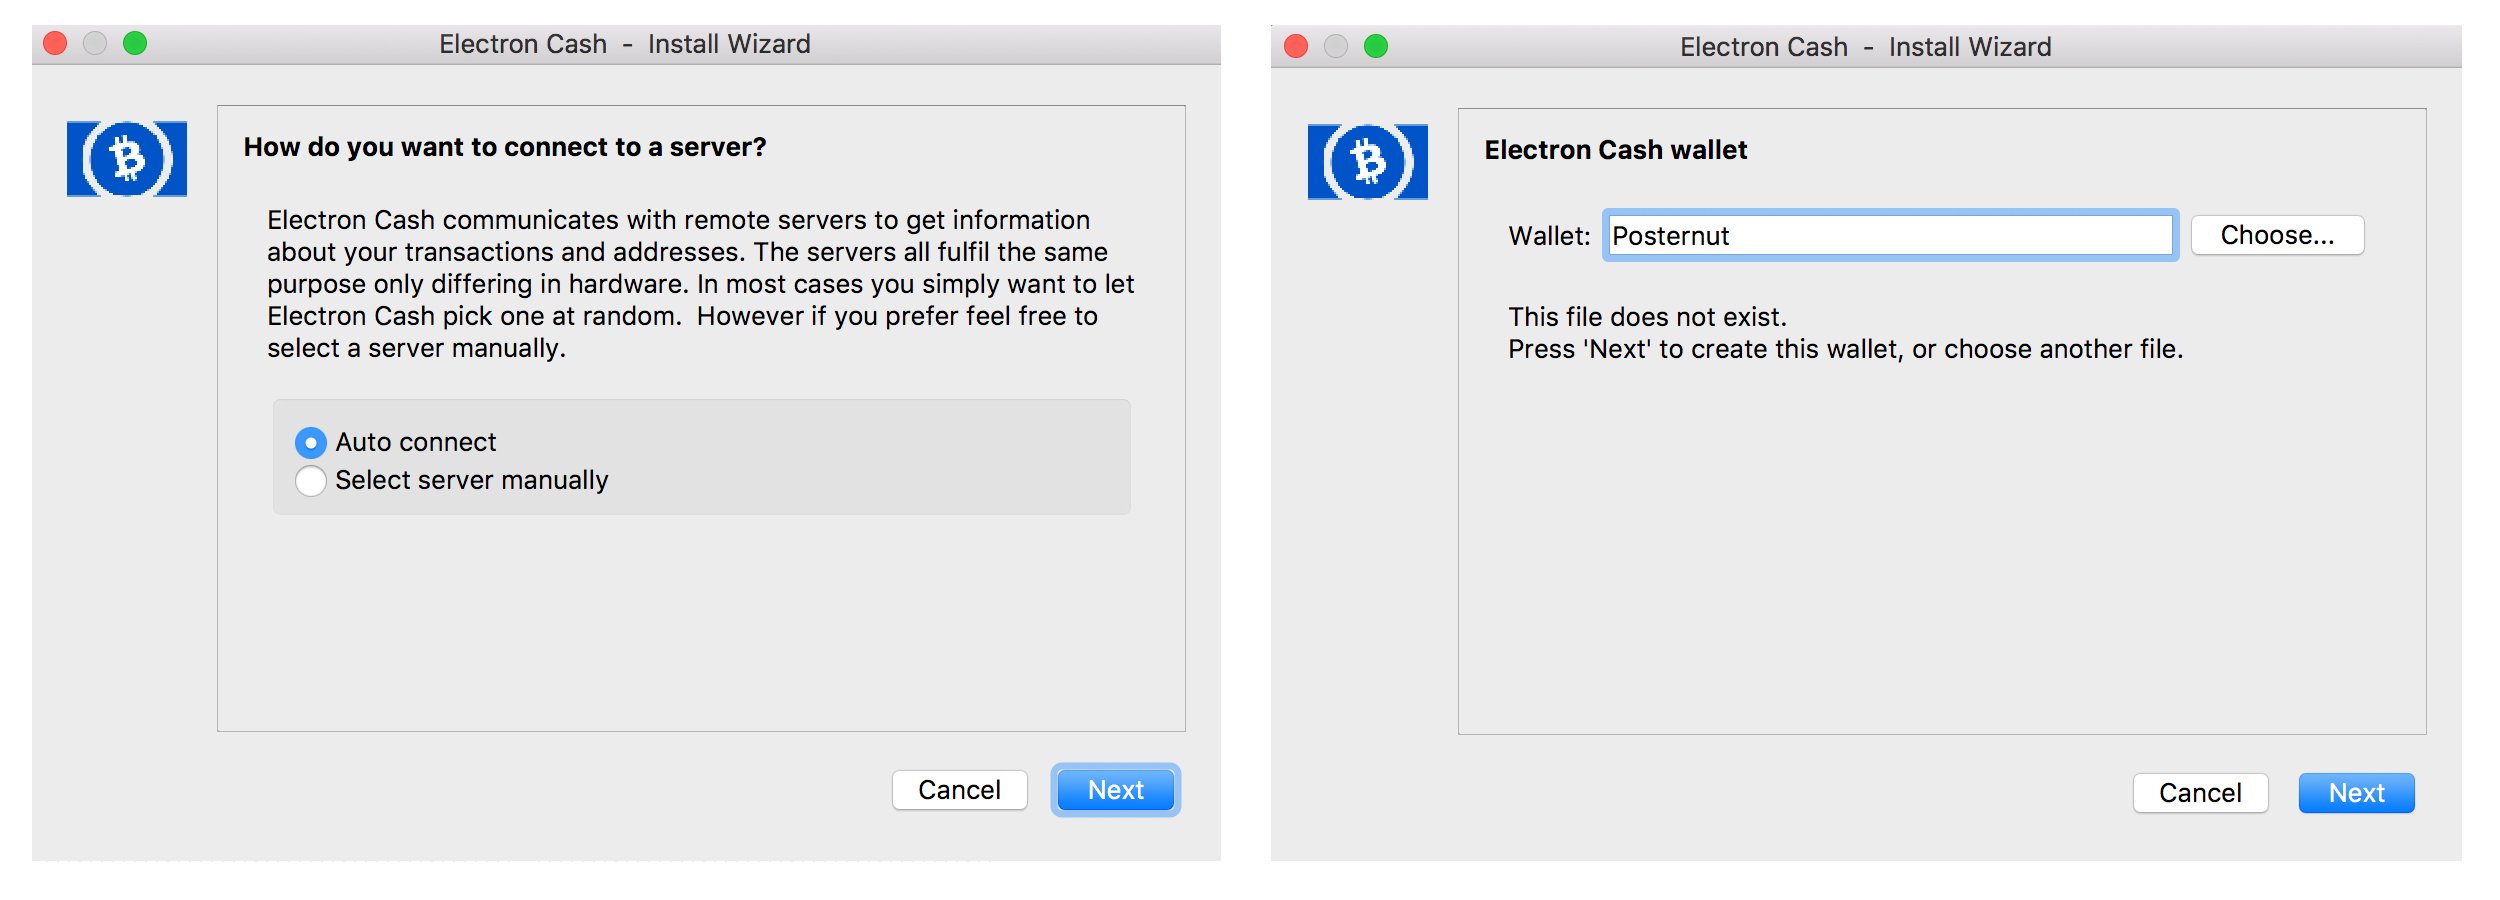 Installing the Electron Cash Wallet 3.2 Release and the Cashshuffle Plugin 